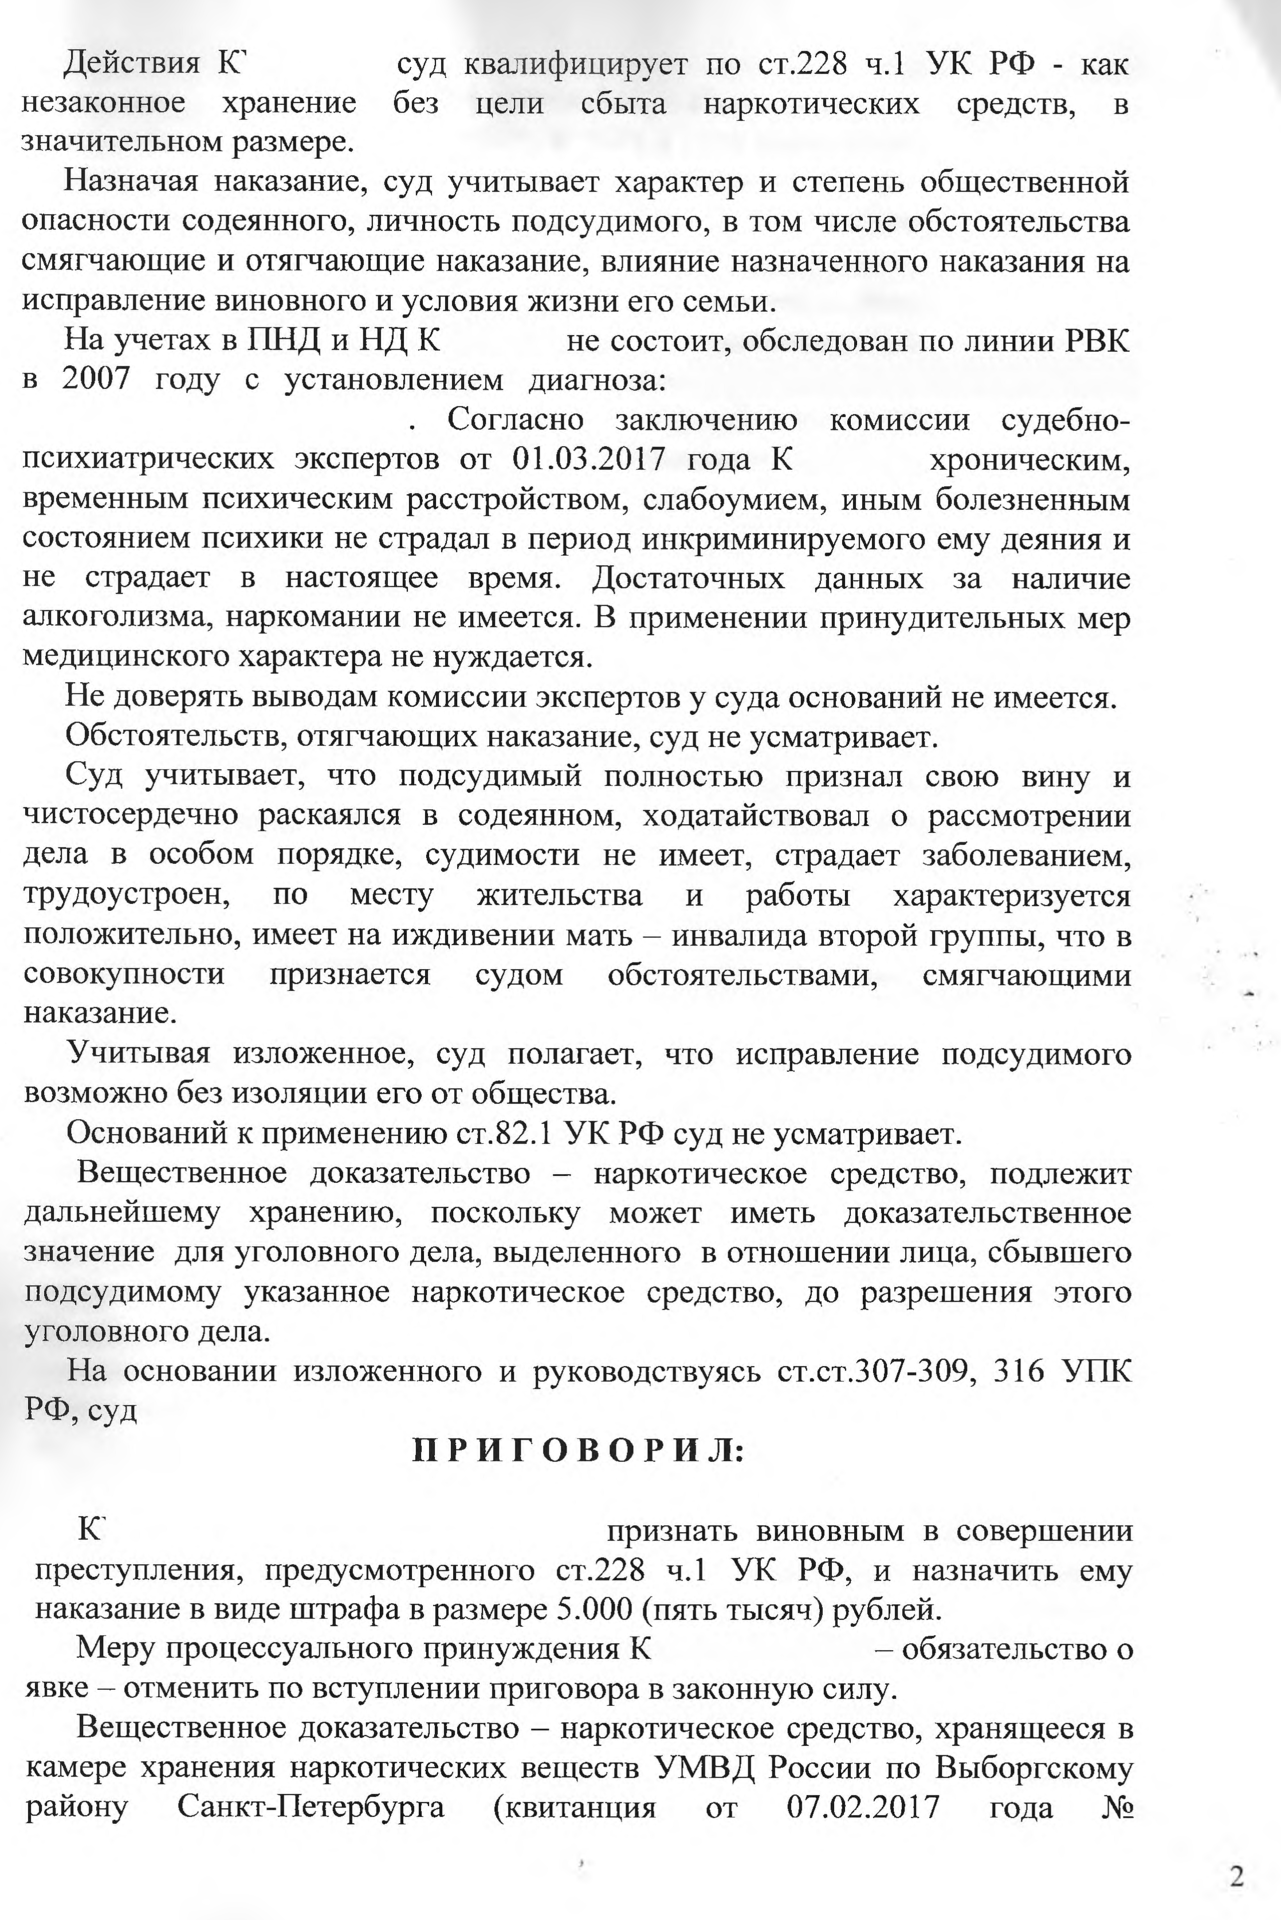 Ст 228 1 ч 5 ук рф. Ст. 30, ч. 4, ст. 228.1 УК РФ. Ст30 ч3 ст 228 ч3. Ст. 30 ч.3, ст.228.1 ч.5 УК РФ. 228.1 Ч 5 УК РФ.